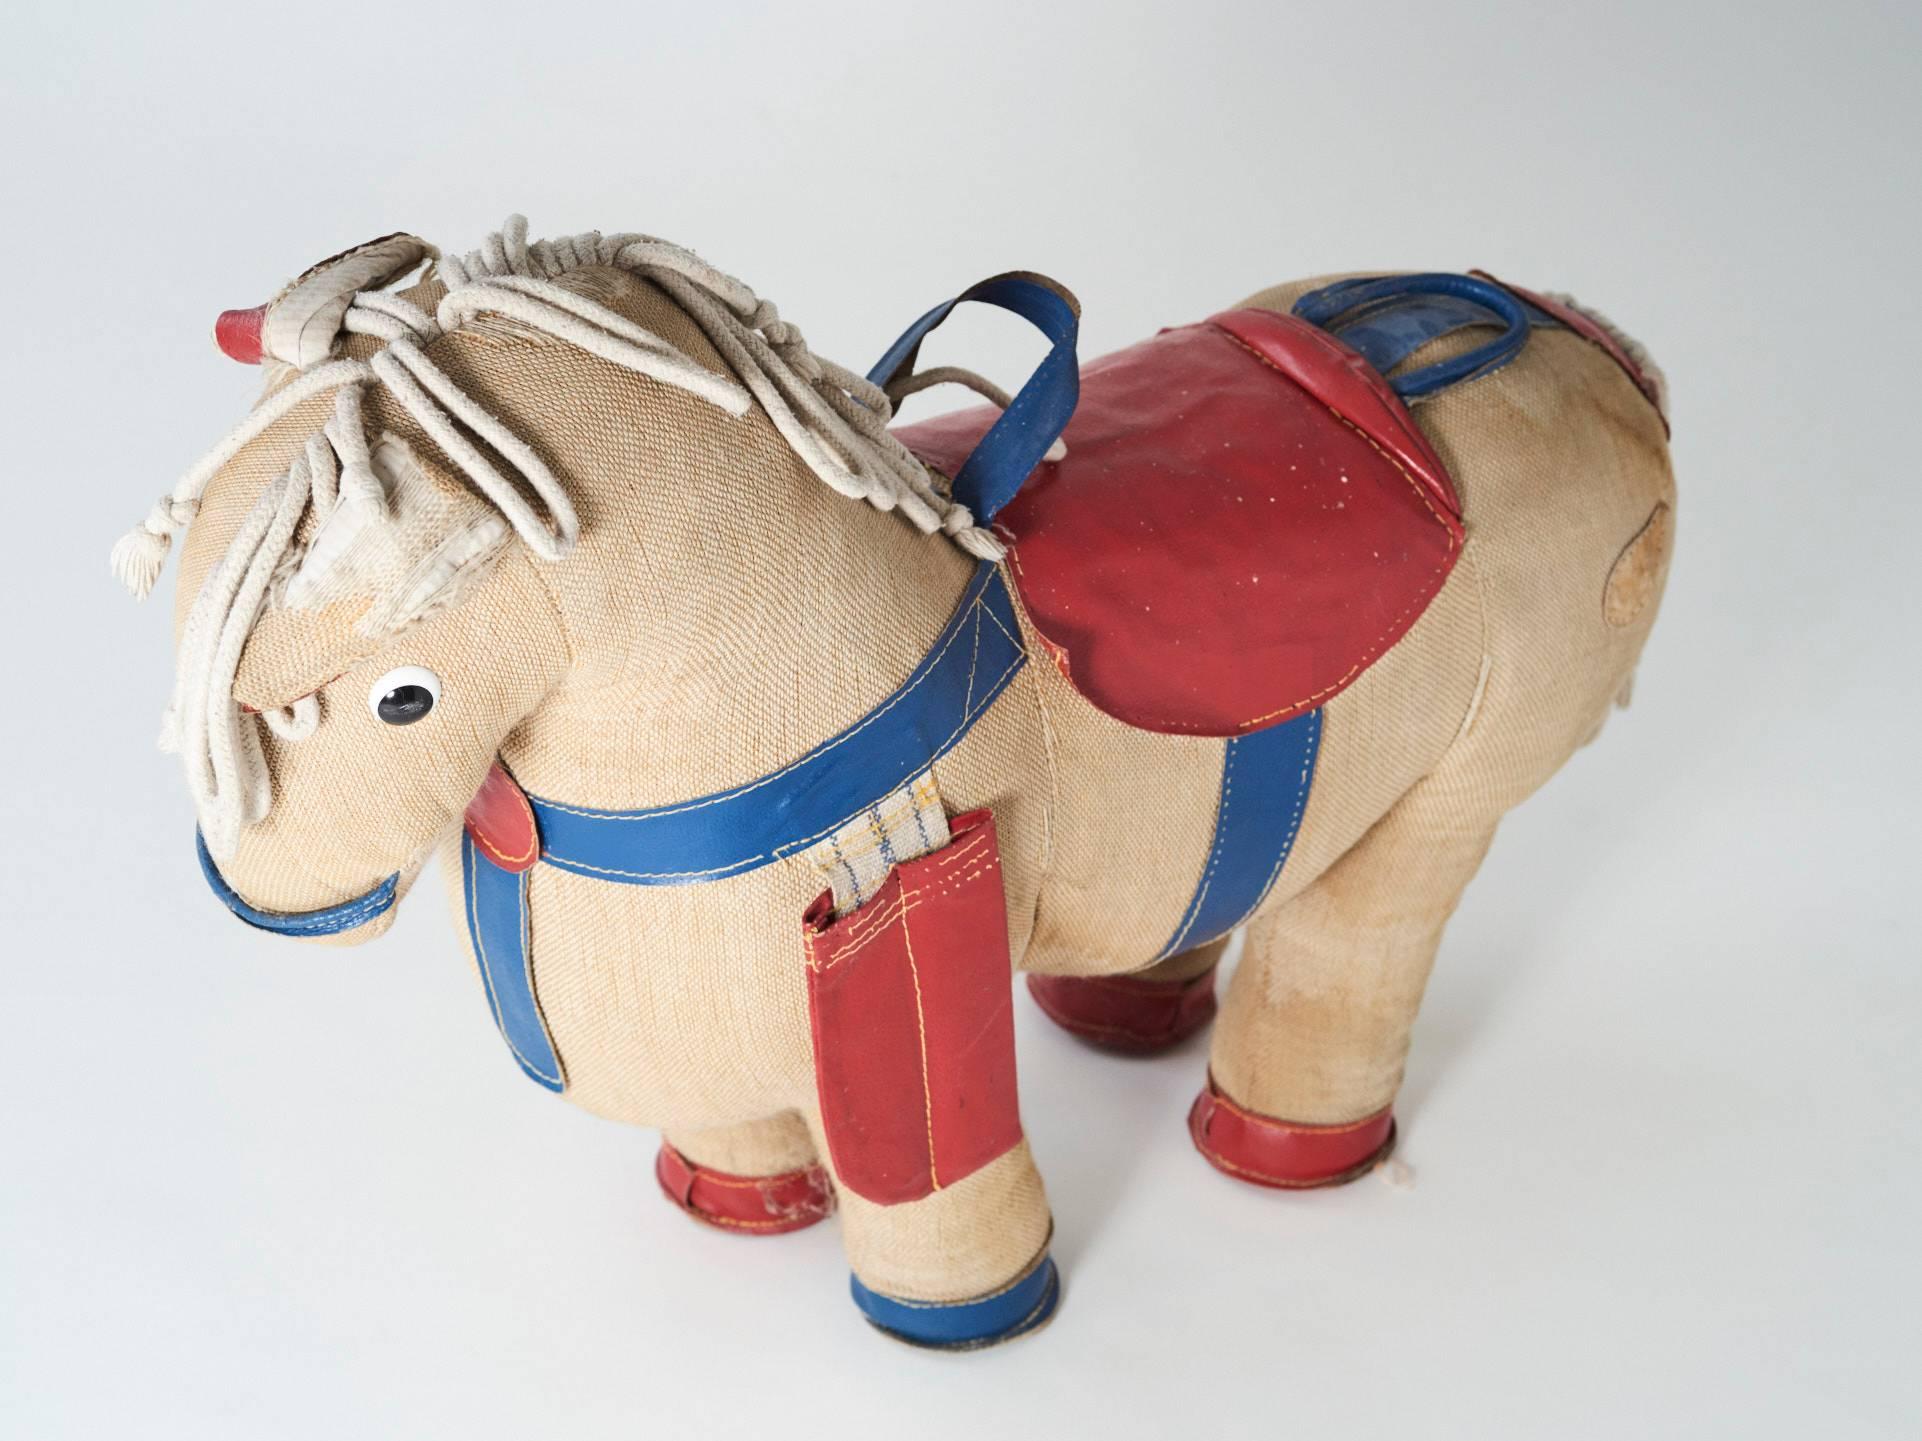 Mid-Century Modern Horse by Renate Müller Therapeutic Toy